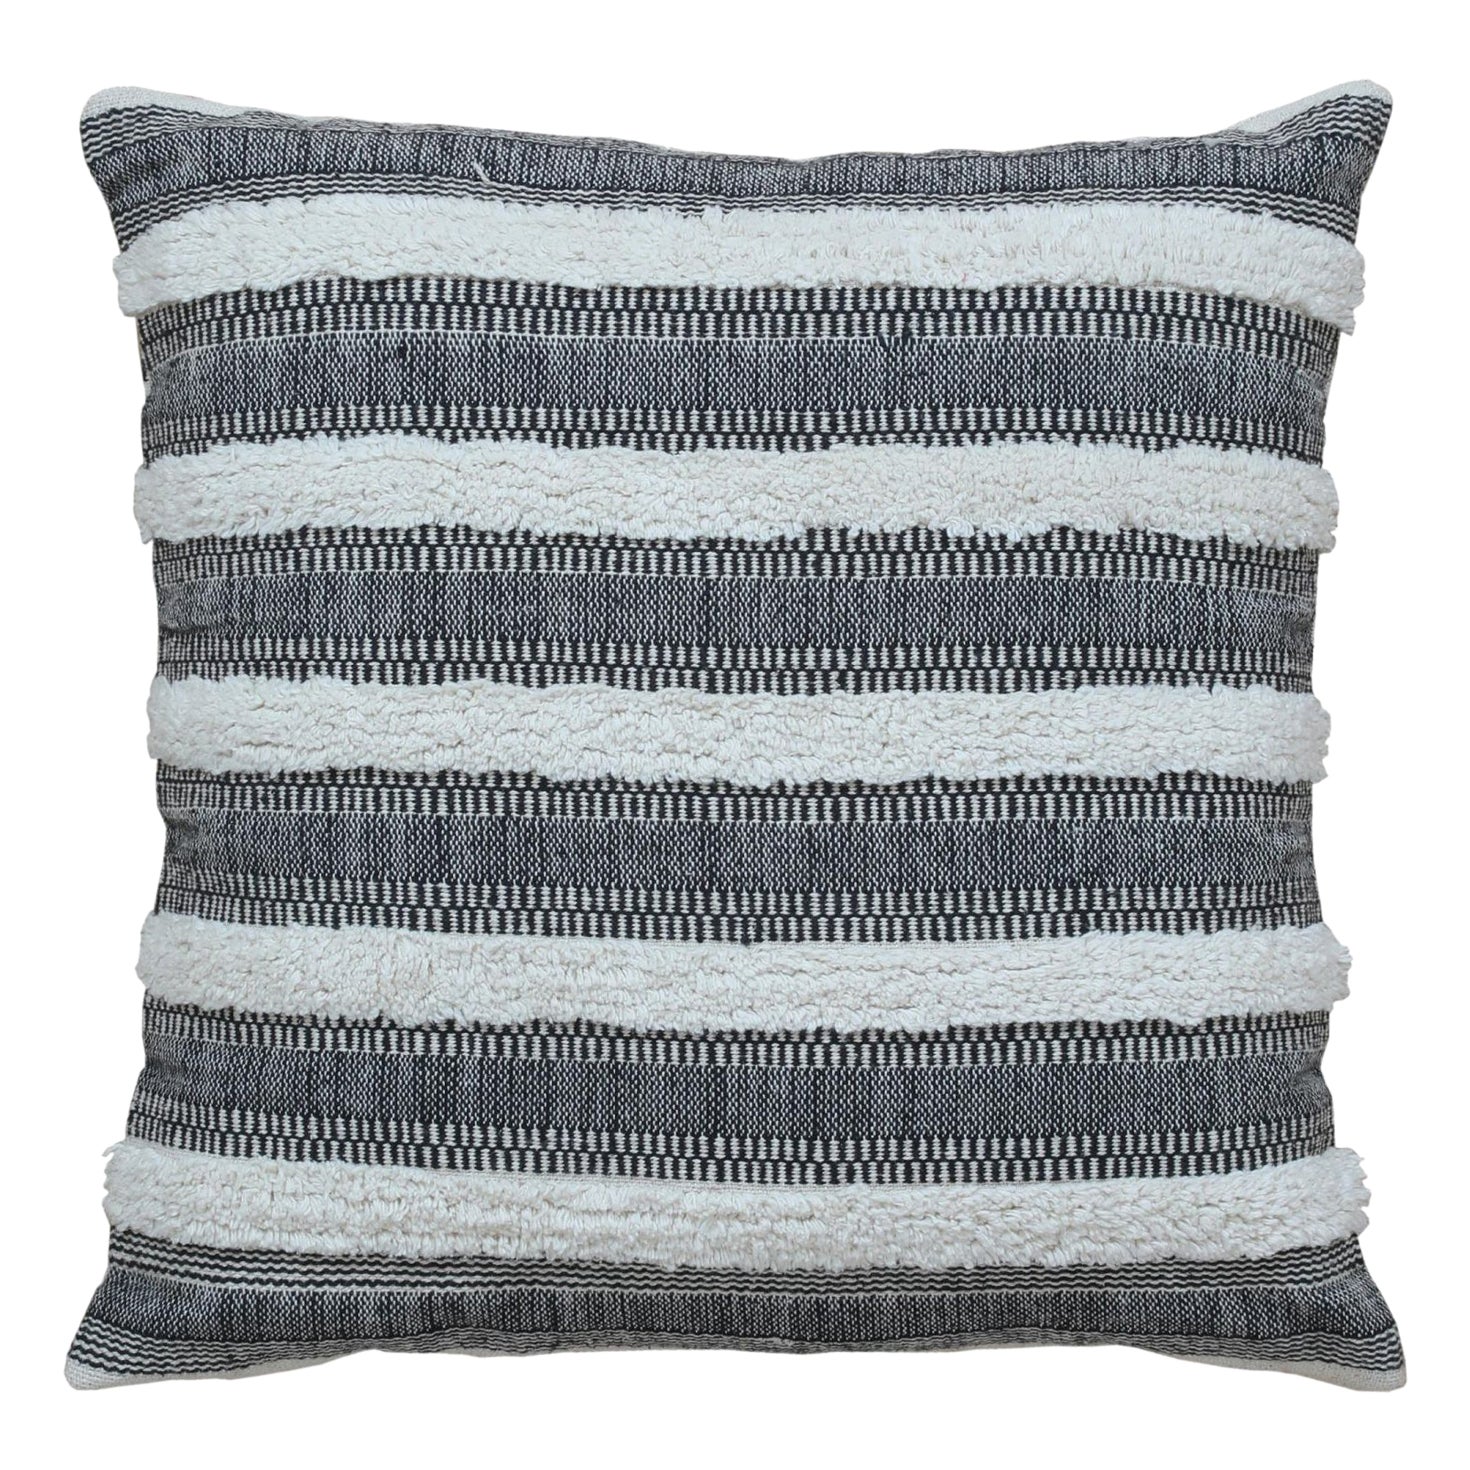 Gray Boho Chic Wool and Cotton Pillow With Geometric Design For Sale